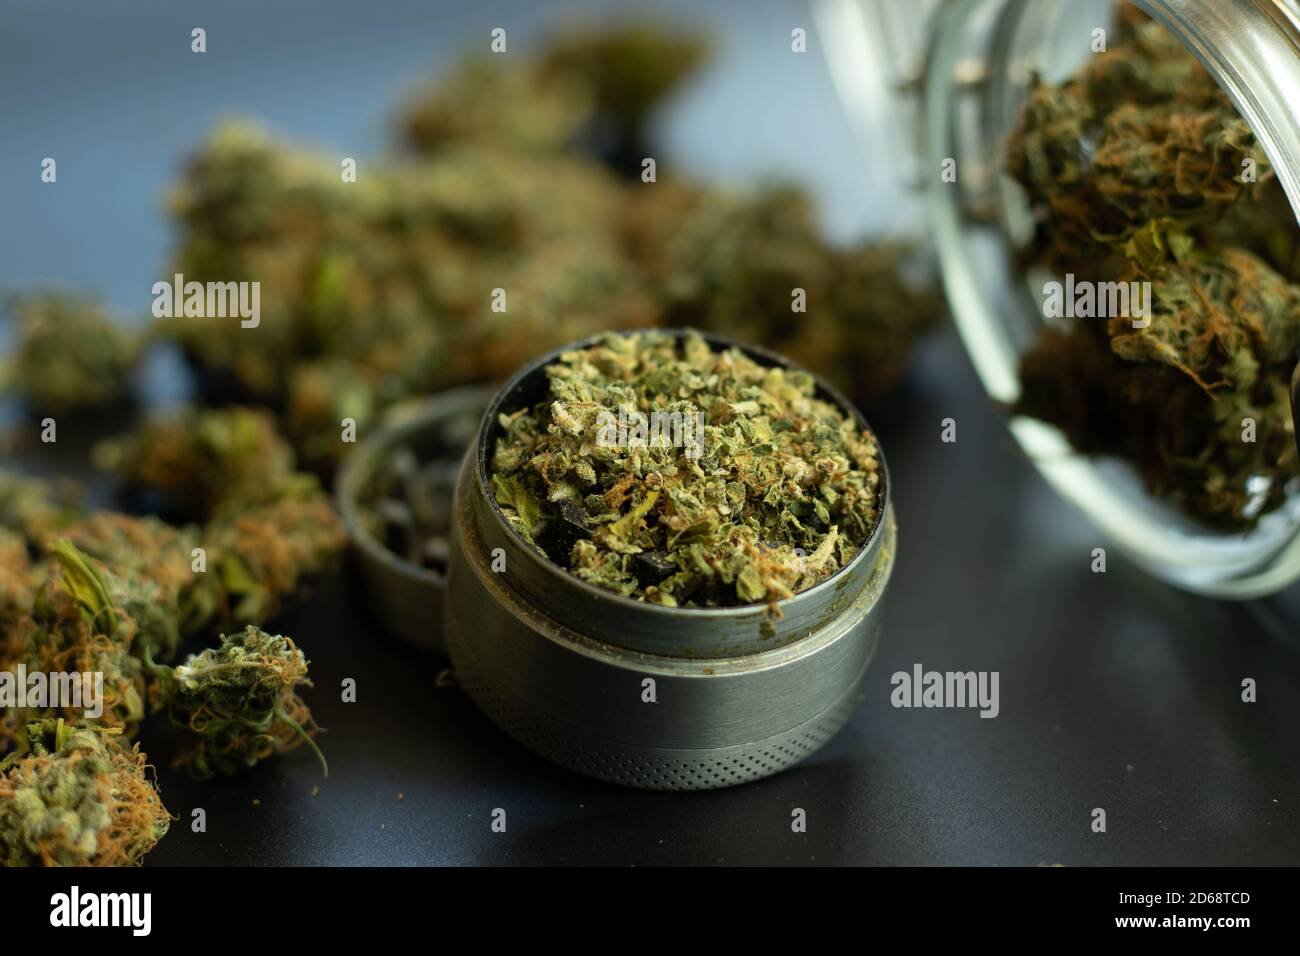 Legal use of cannabis for medical purposes. Marijuana bud background, weed in grinder and jar close up Stock Photo